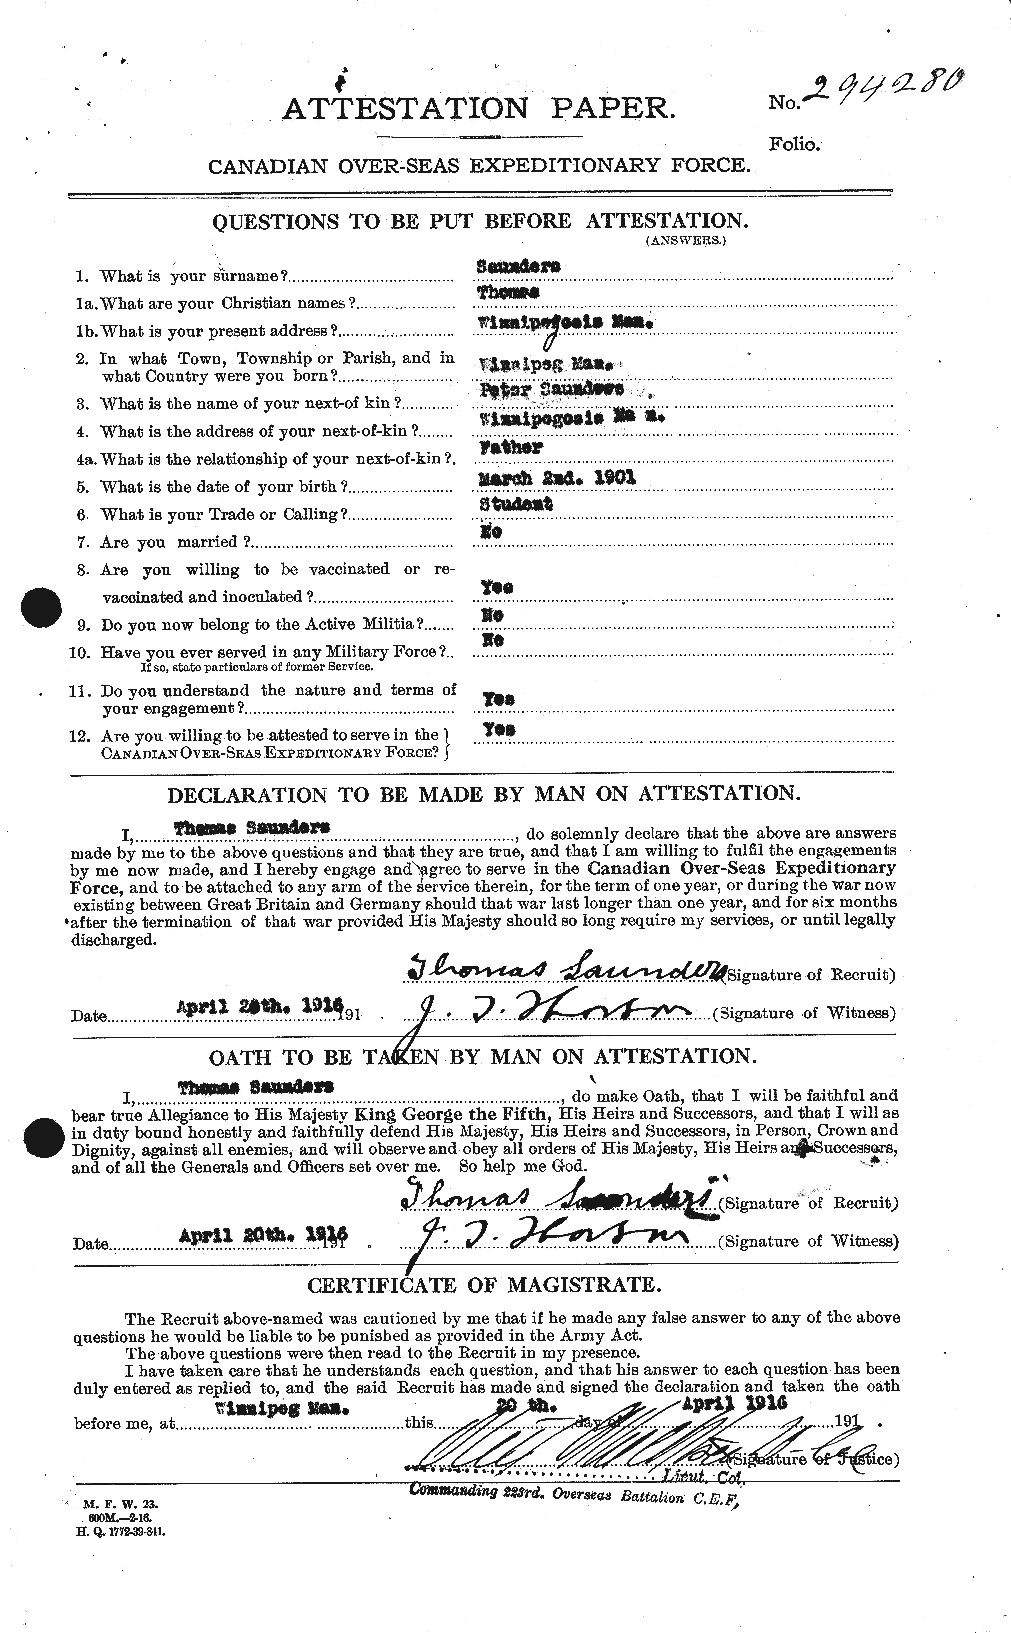 Personnel Records of the First World War - CEF 080426a